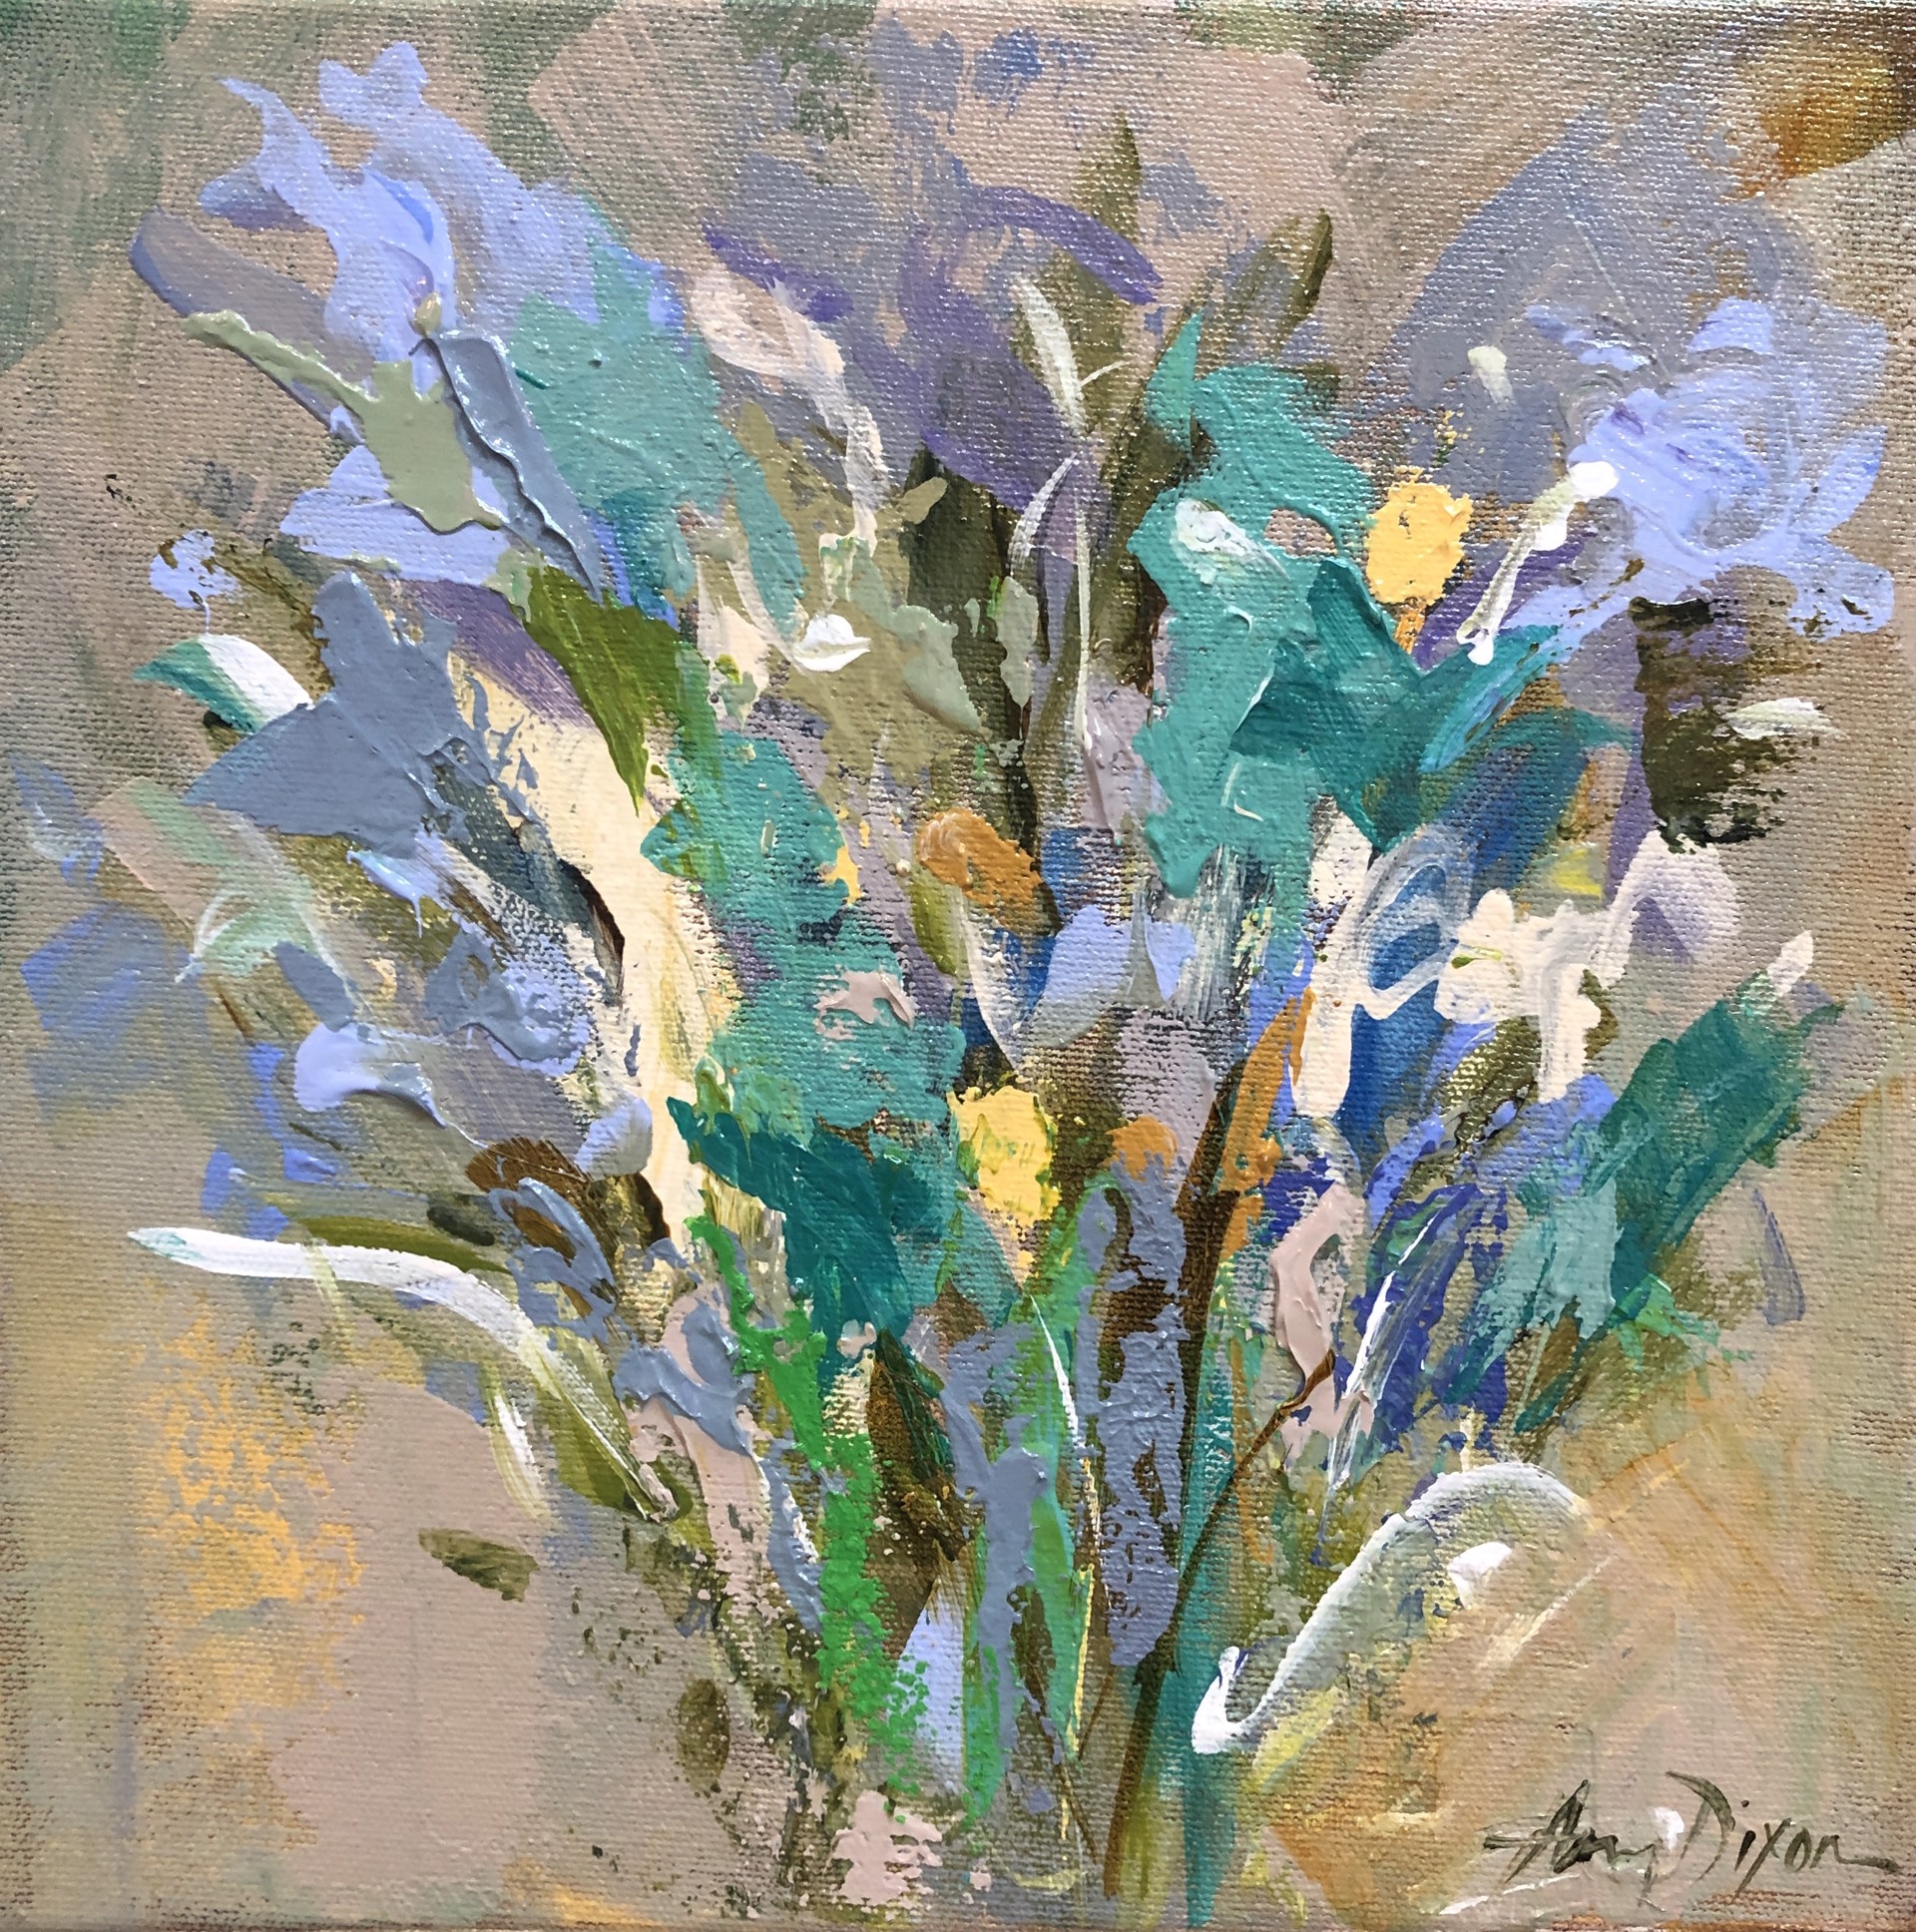 Expressions in Blue III by Amy Dixon